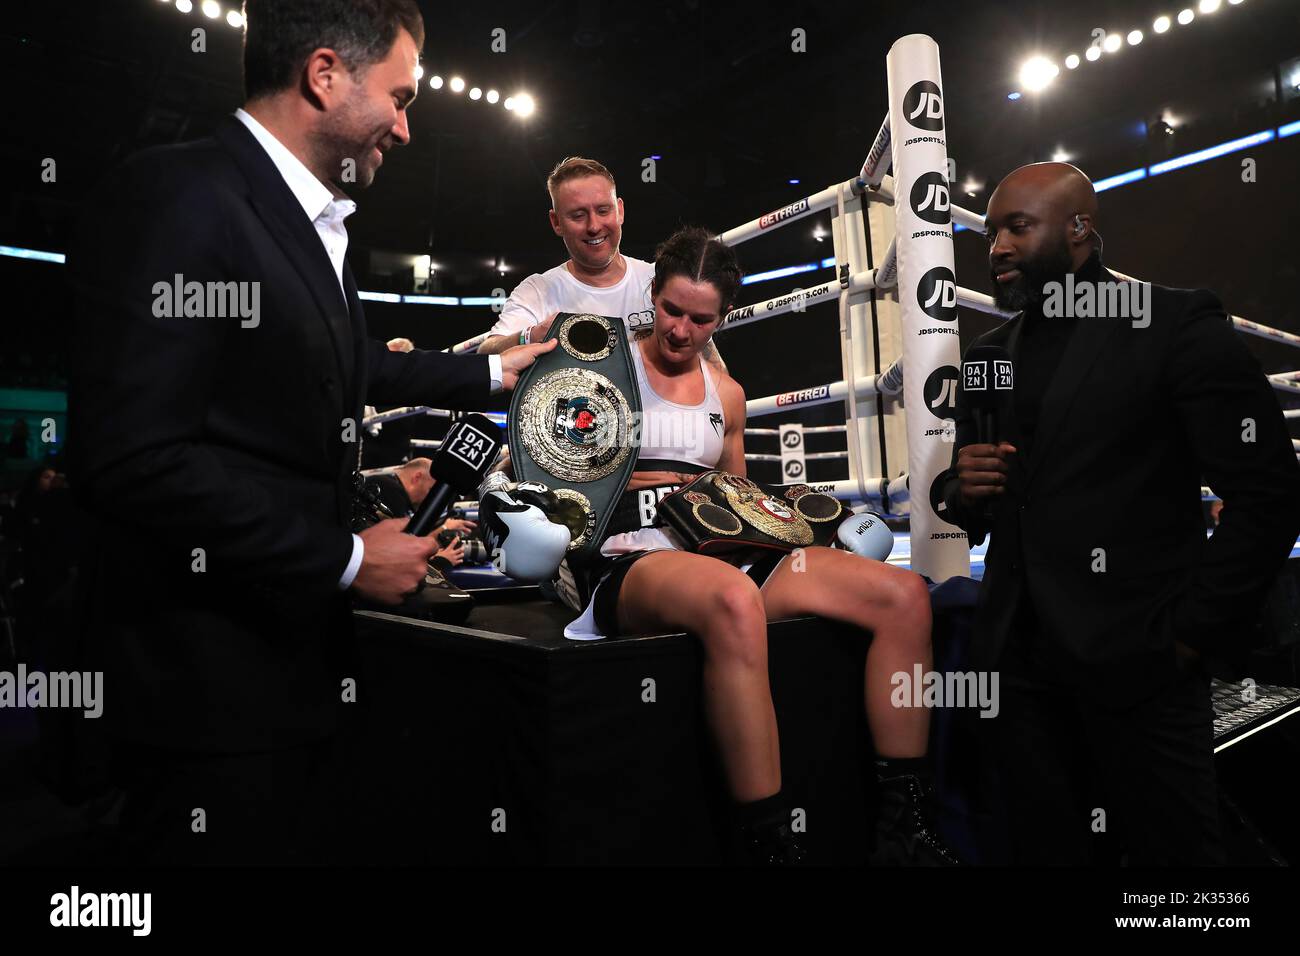 Boxing promotor Eddie Hearn (left) handsTerri Harper the belts after victory in the WBA and IBO World Super Welterweight titles fight against Hannah Rankin at Motorpoint Arena, Nottingham. Picture date: Saturday September 24, 2022. Stock Photo